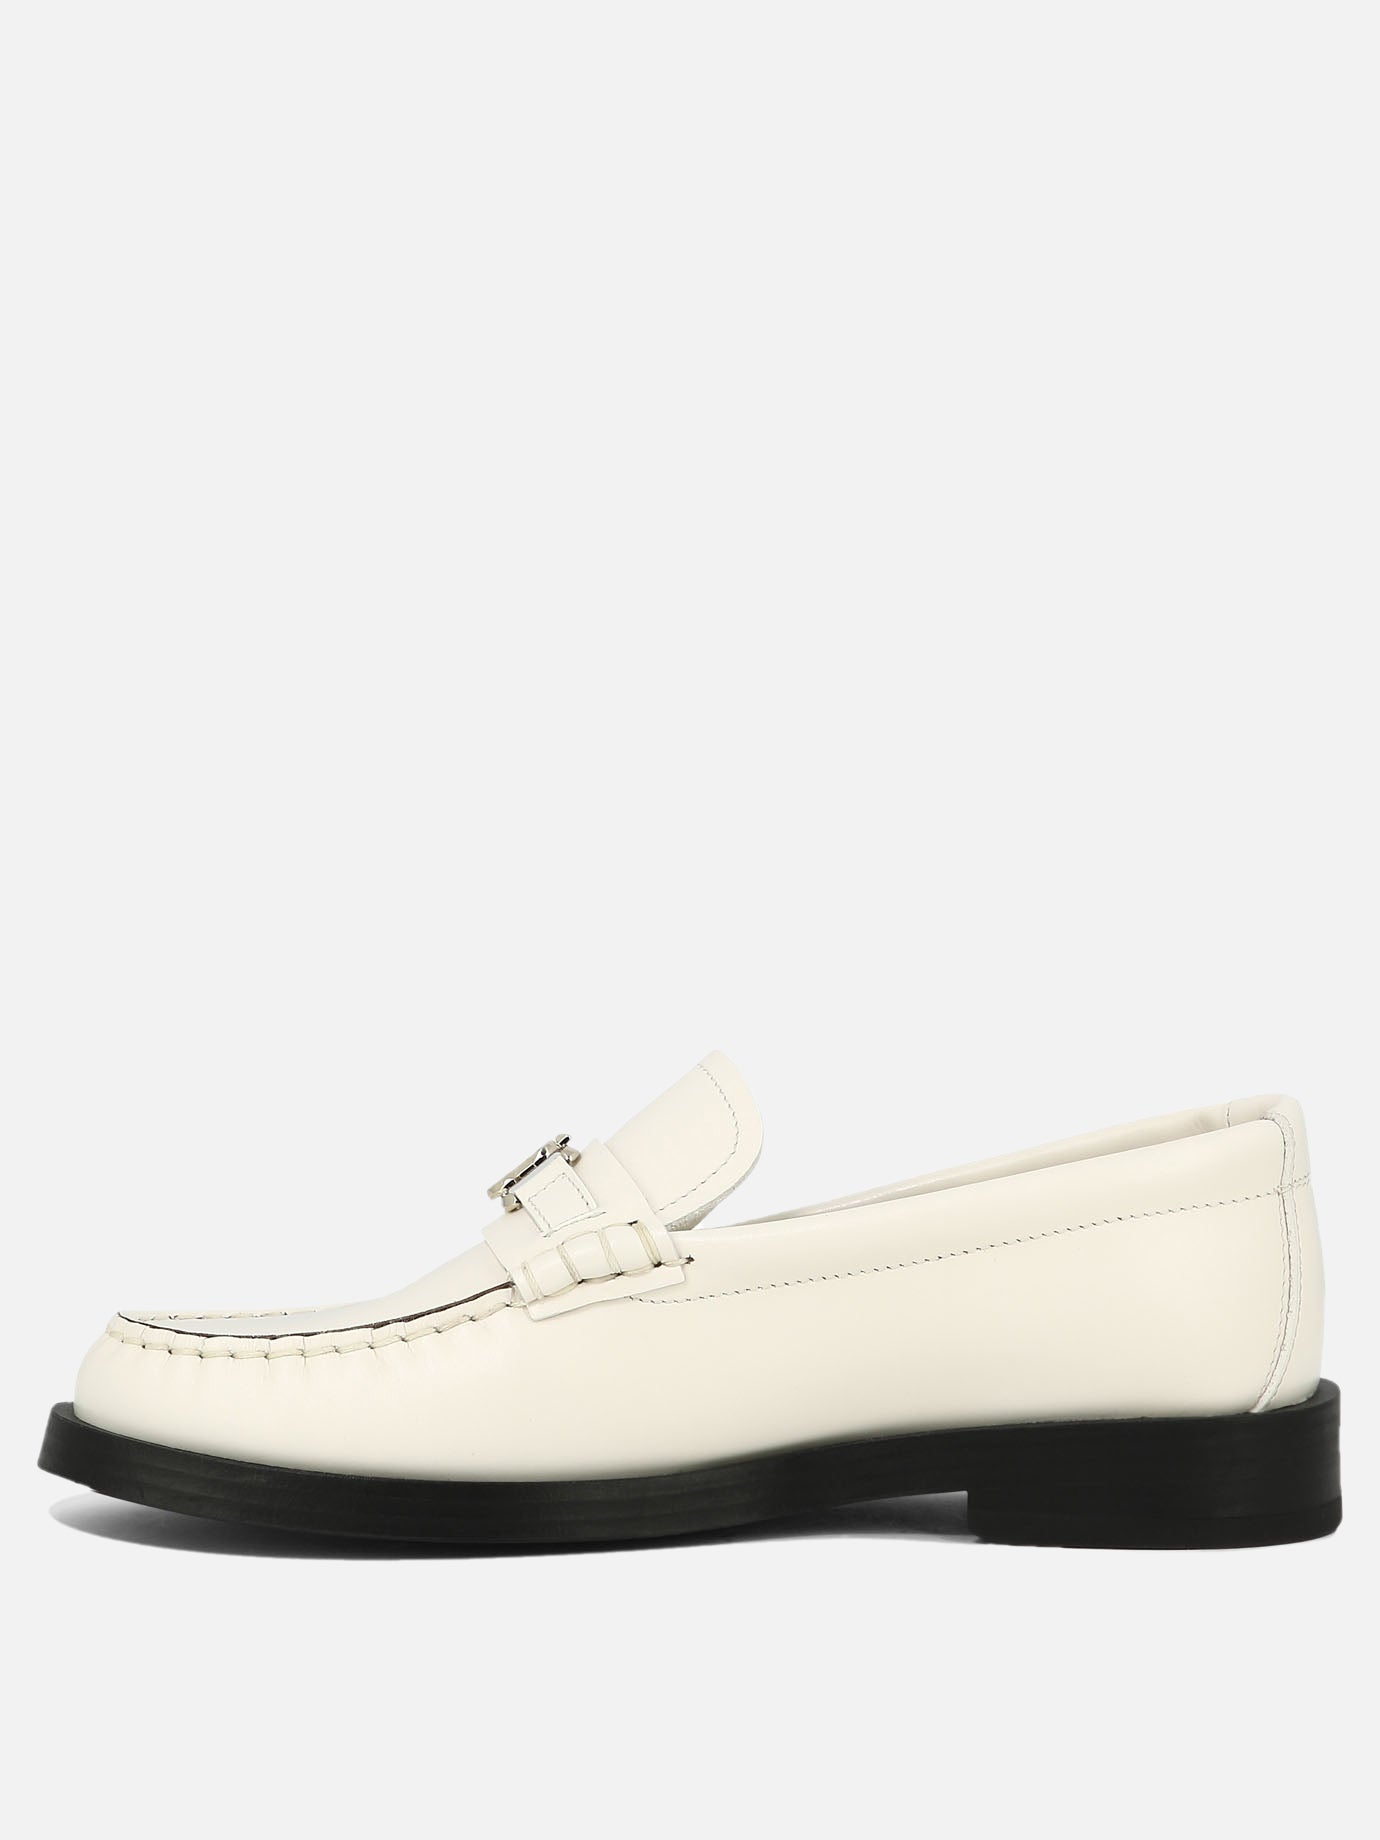 "Addie" loafers